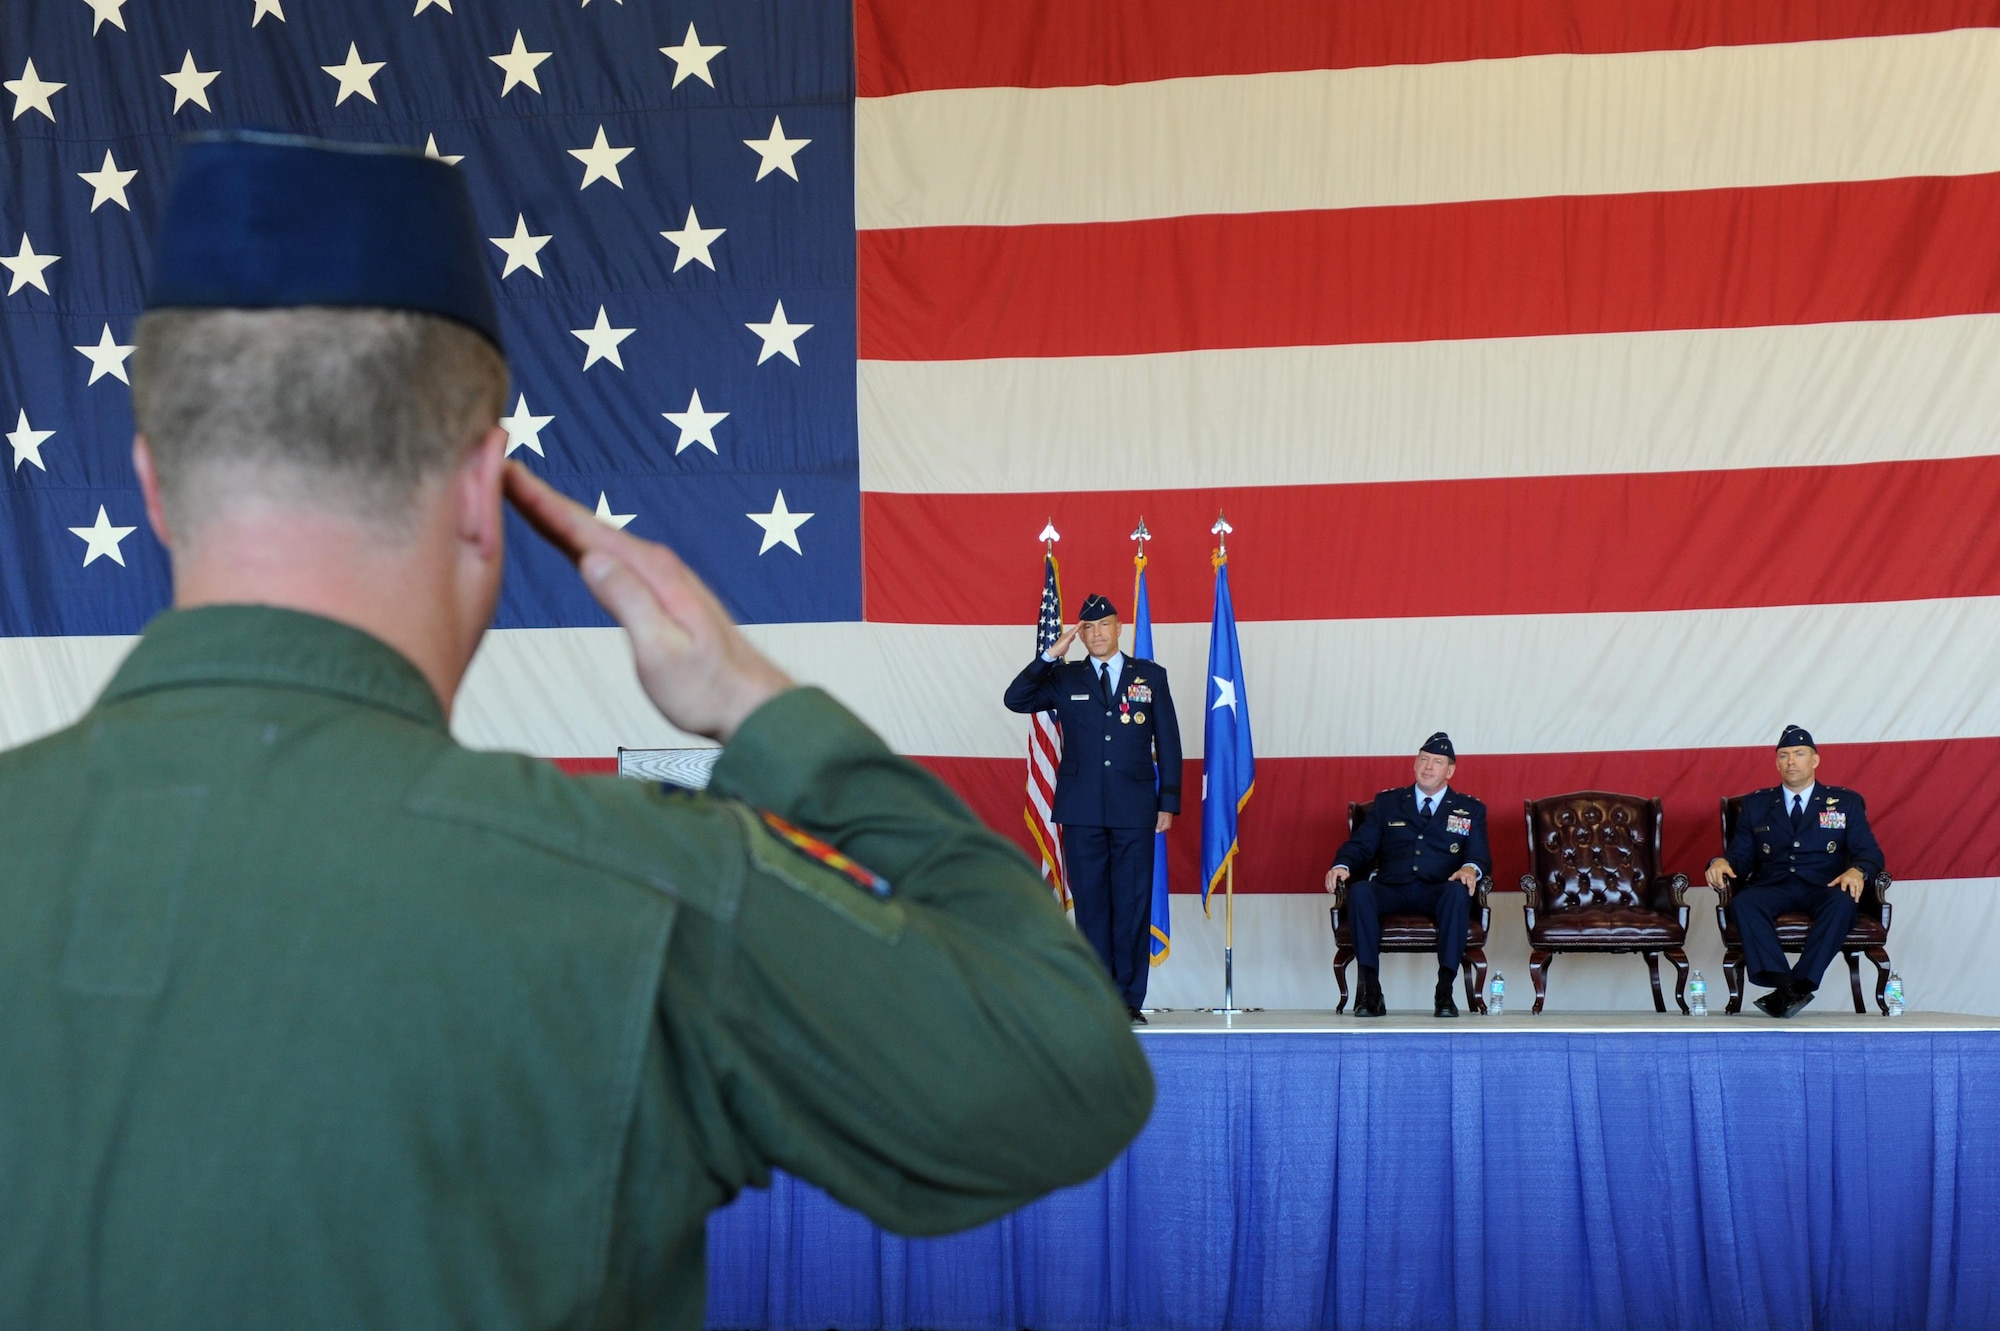 Brig. Gen. Scott Pleus, 56th Fighter Wing commander, receives his final salute from Col. David Shoemaker, 56th Fighter Wing vice commander, during the 56th FW change of command July 13, 2016 at Luke Air Force Base, Arizona. (U.S. Air Force photo by Airman 1st Class Pedro Mota)